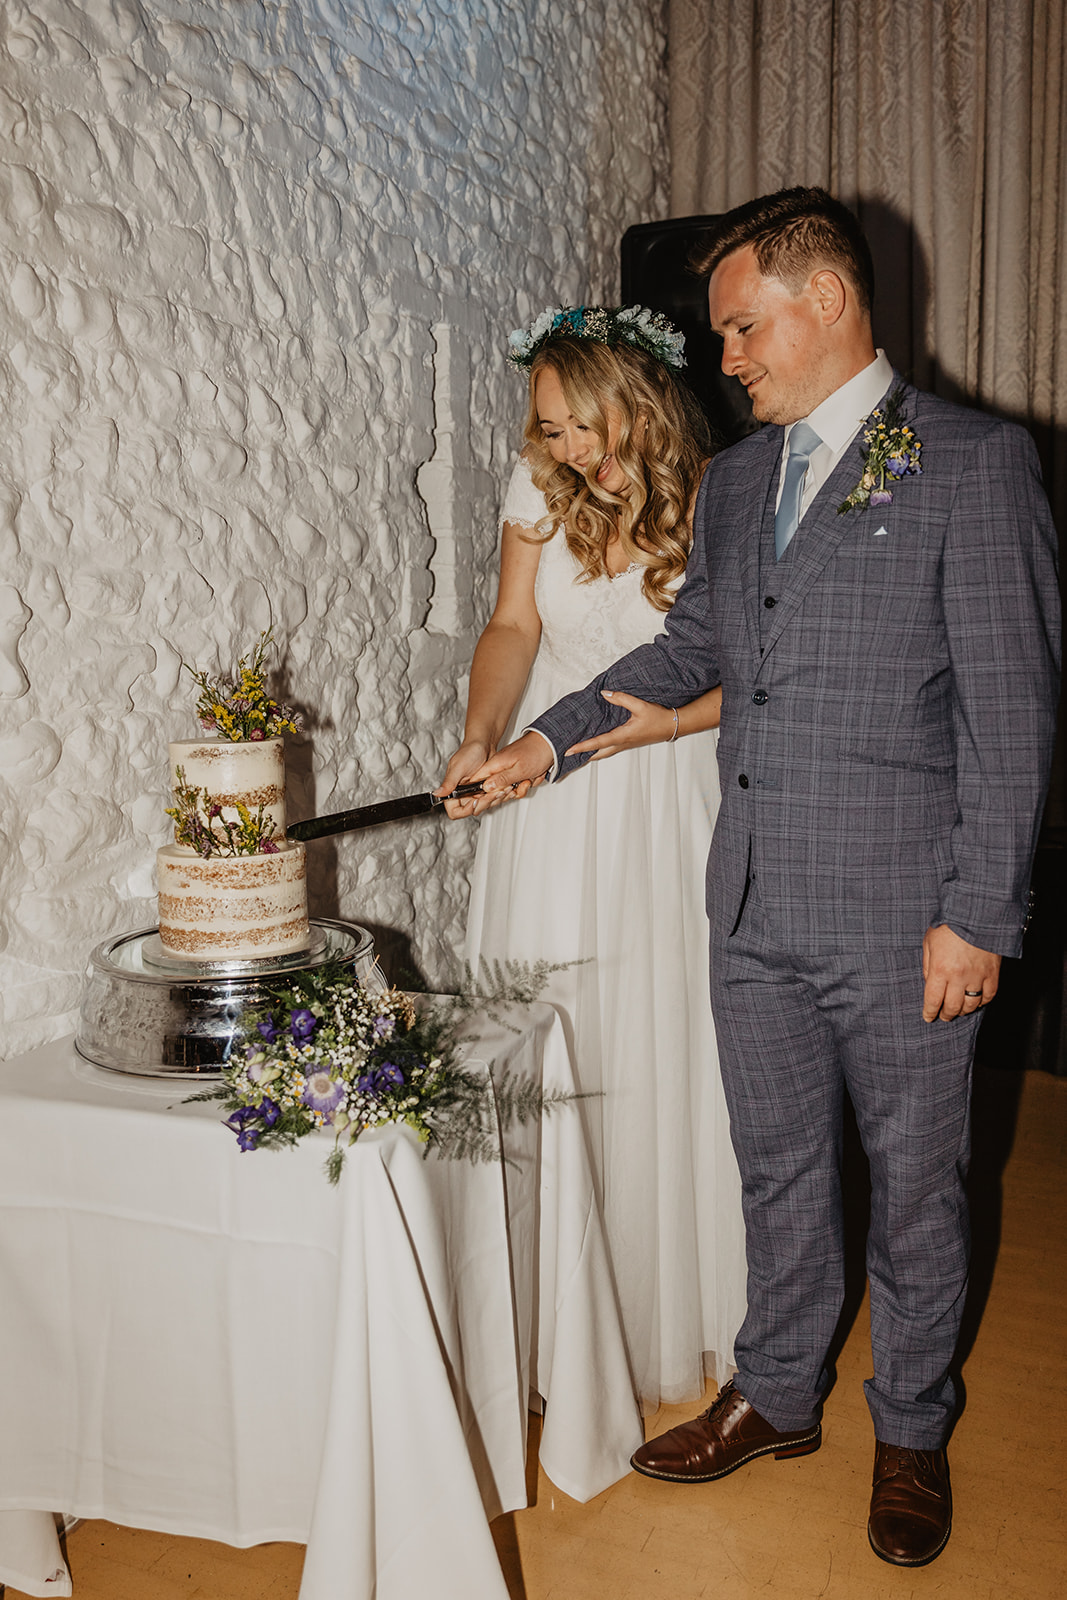 Bride and groom cutting their cake at Field Place Wedding Worthing, Sussex. By OliveJoy Photography.